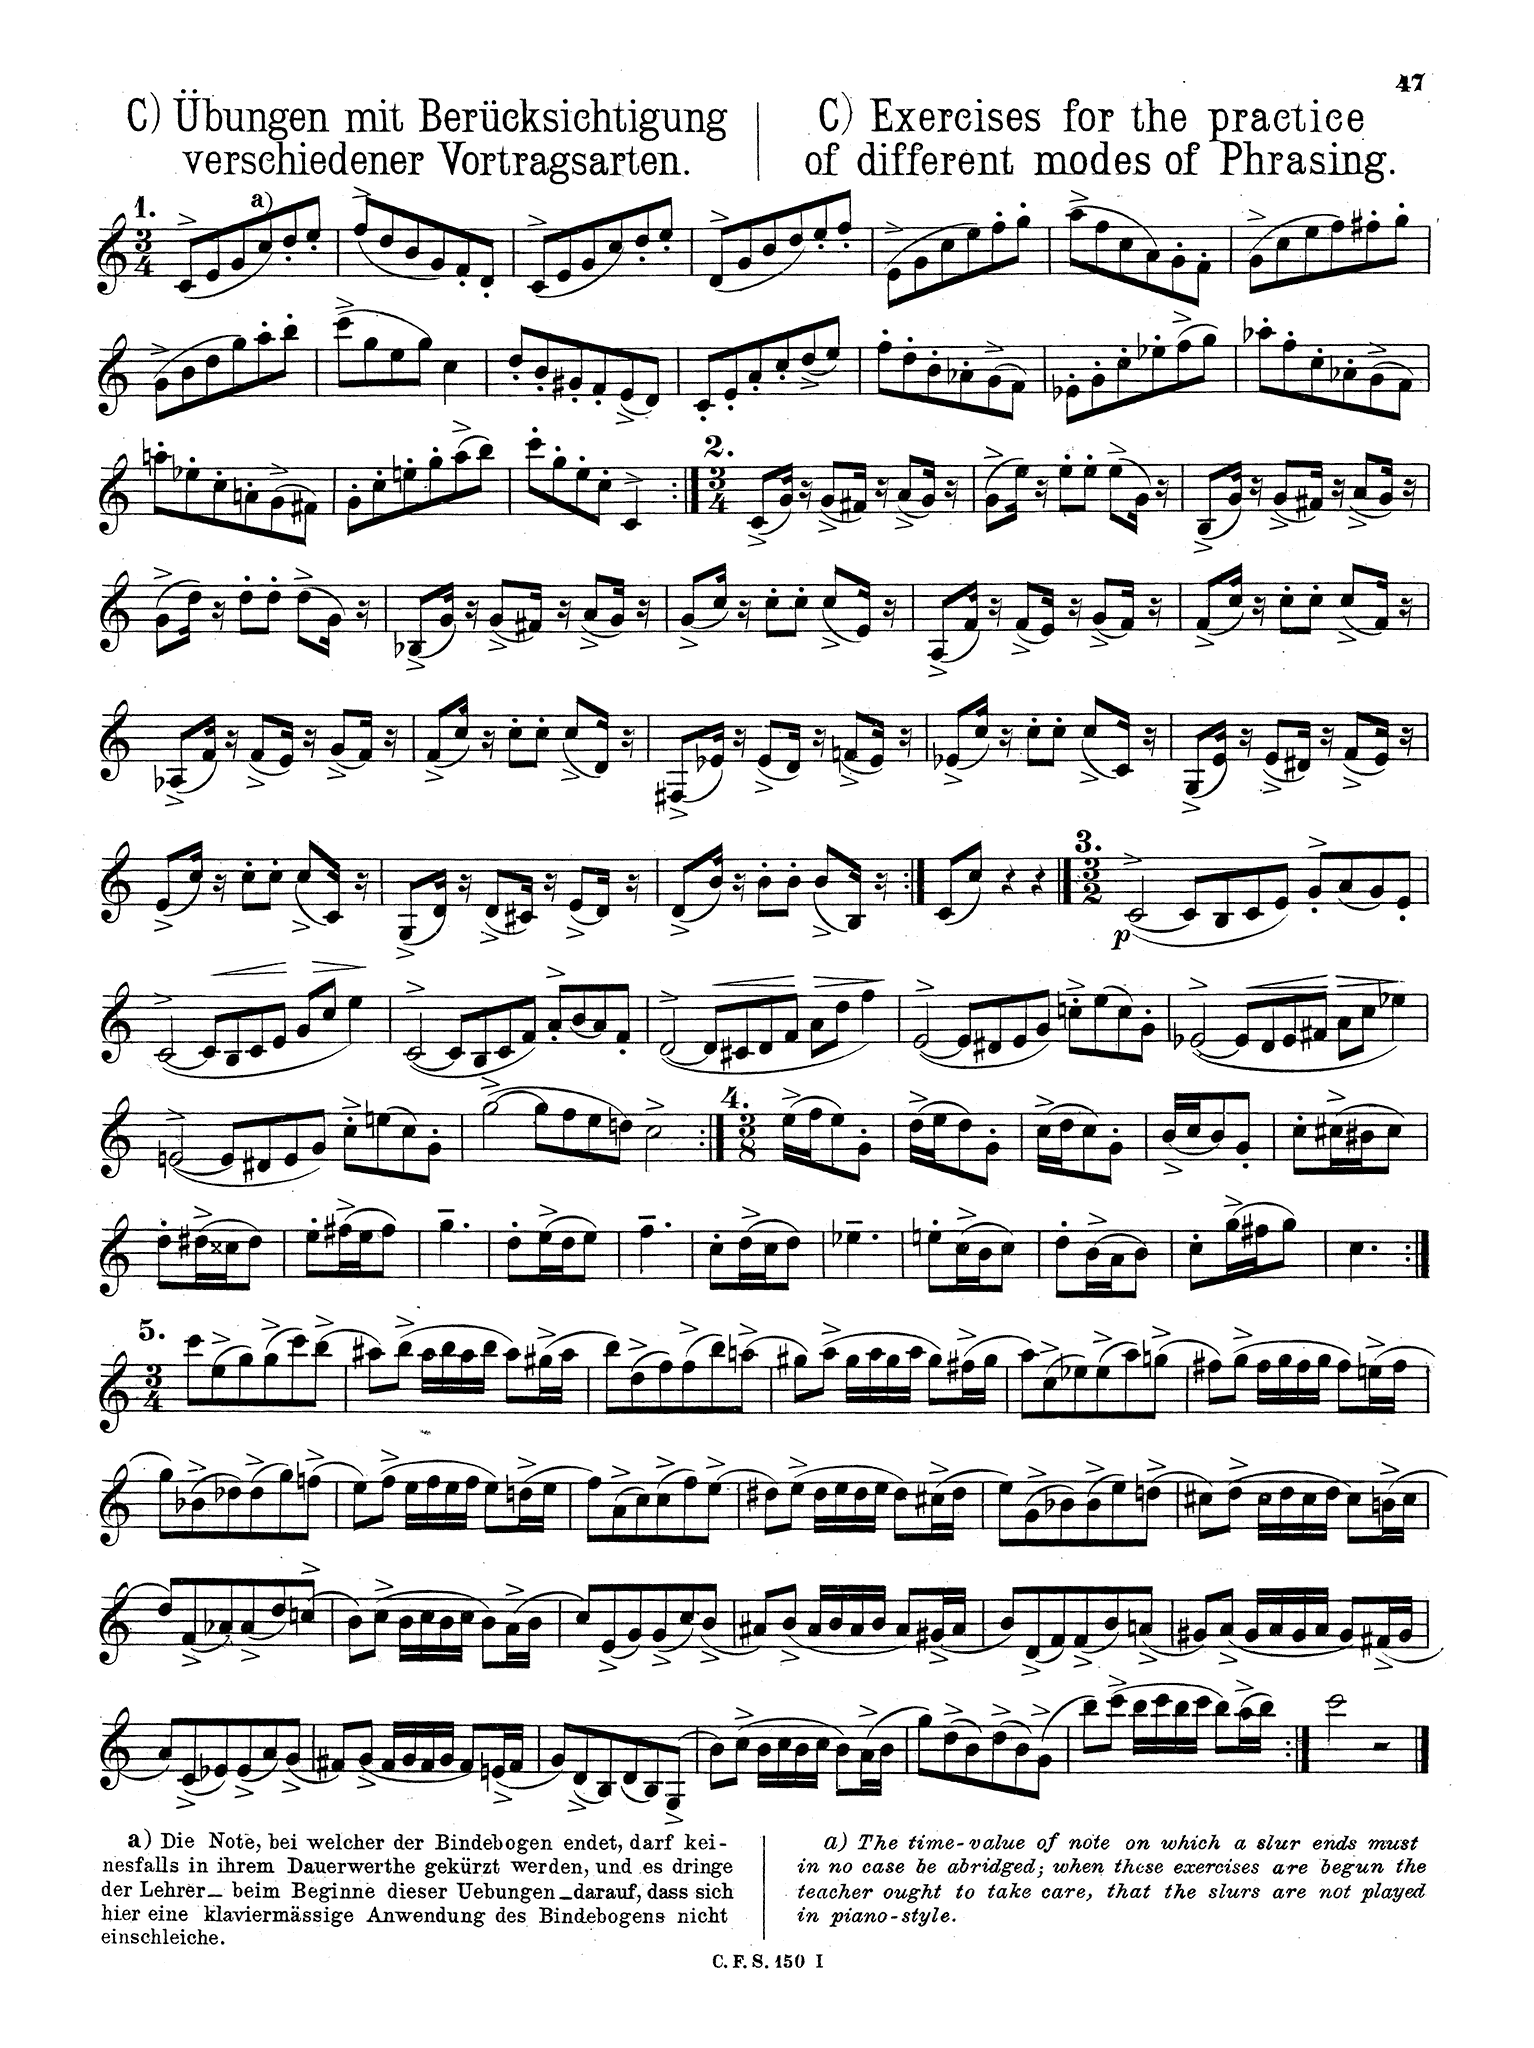 Stark Clarinet Method, Op. 49, Vol. 1: Section 1 of 2  page 47